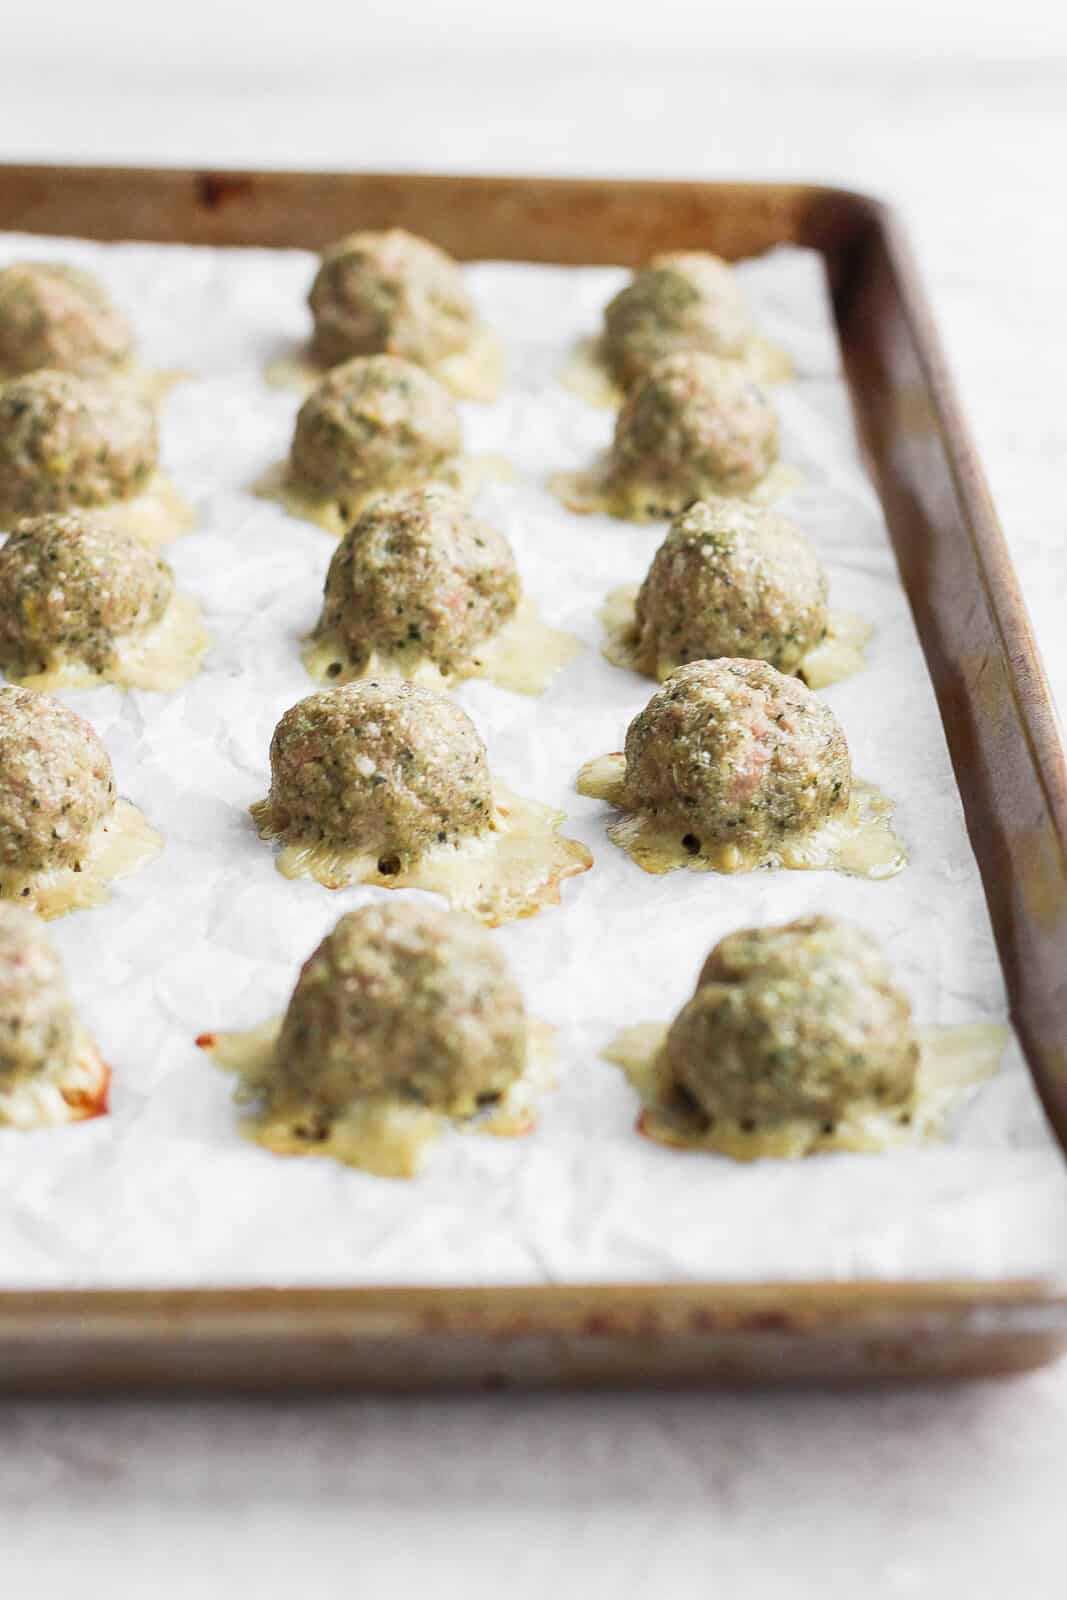 Cooked pesto meatballs on parchment-lined baking sheet.